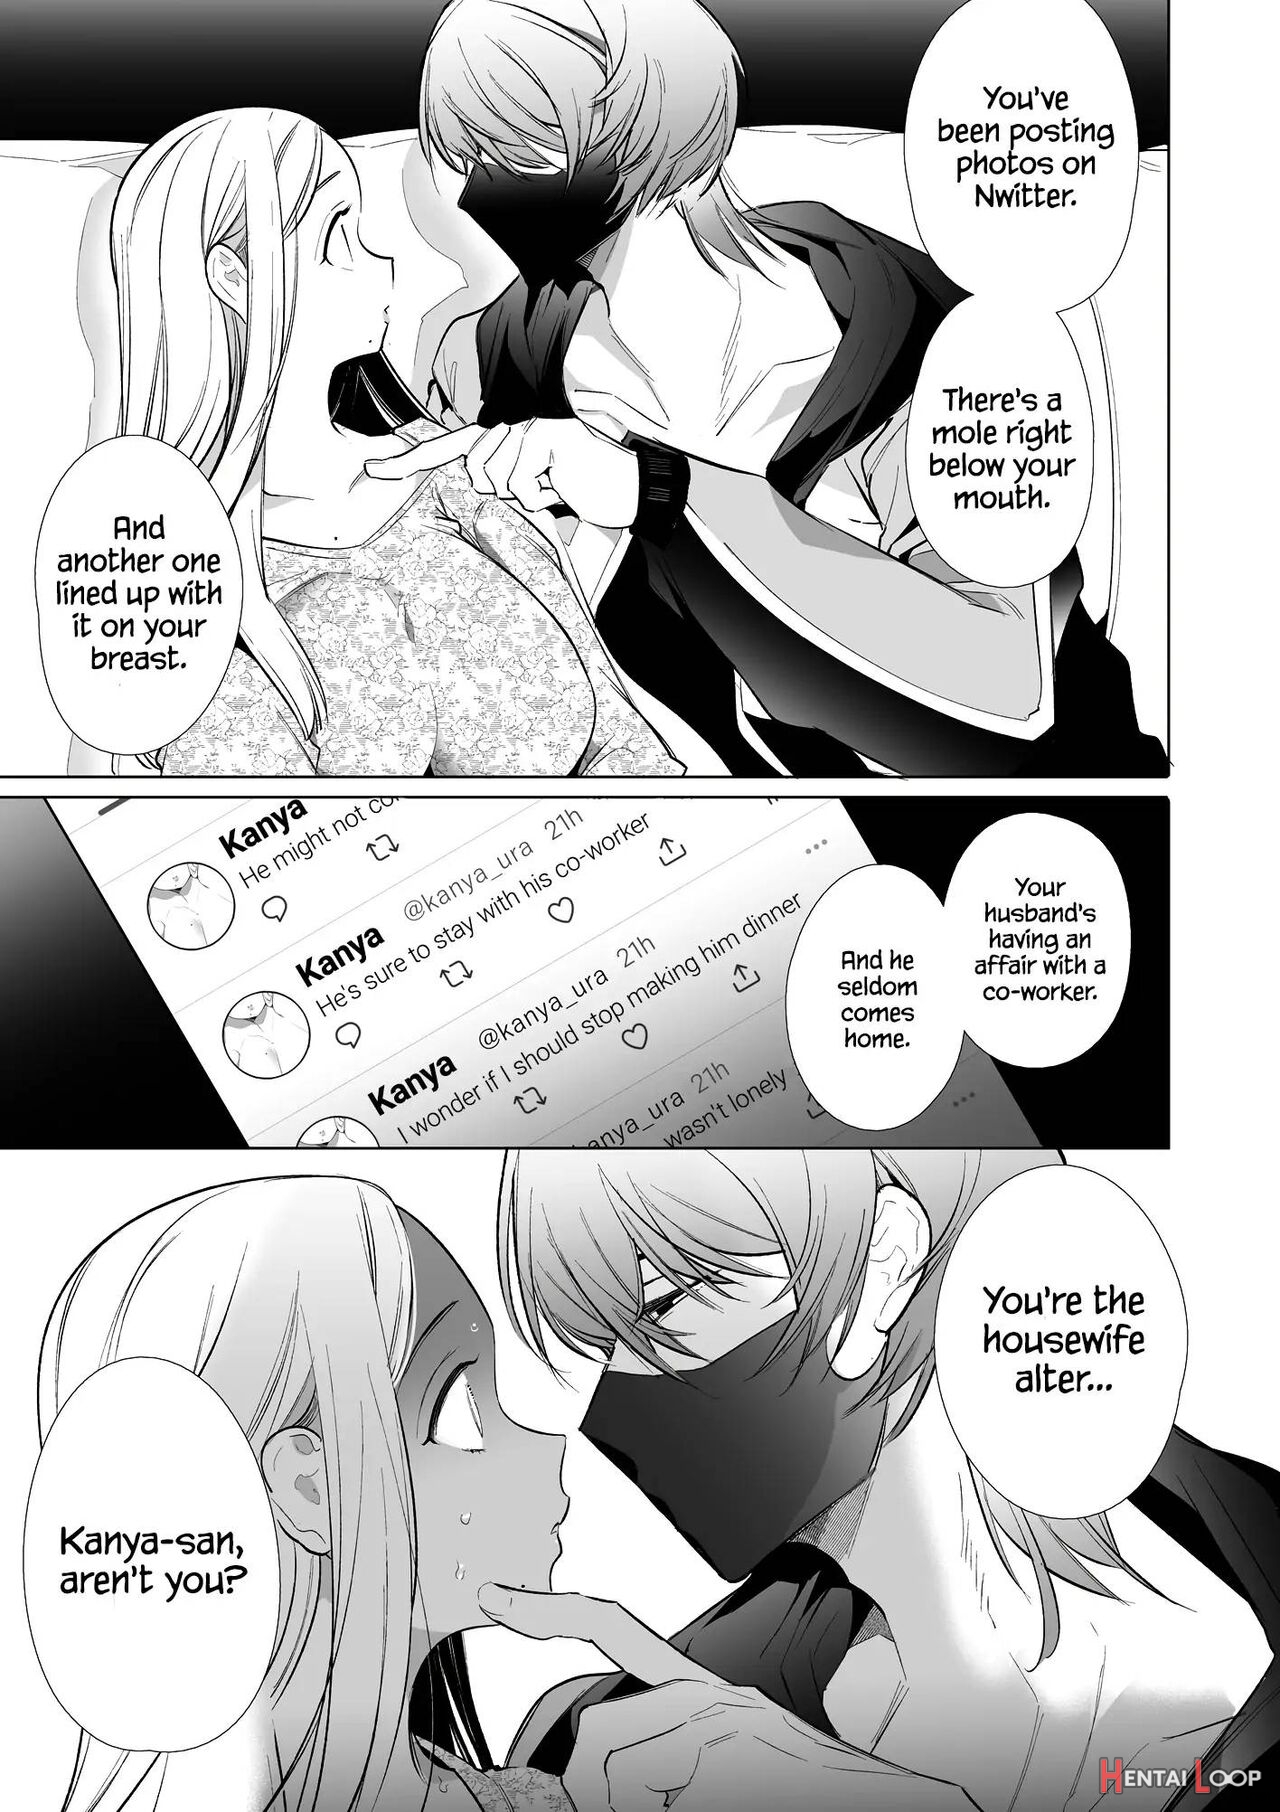 Kana-san Ntr ~ Degradation Of A Housewife By A Guy In An Alter Account ~ page 18